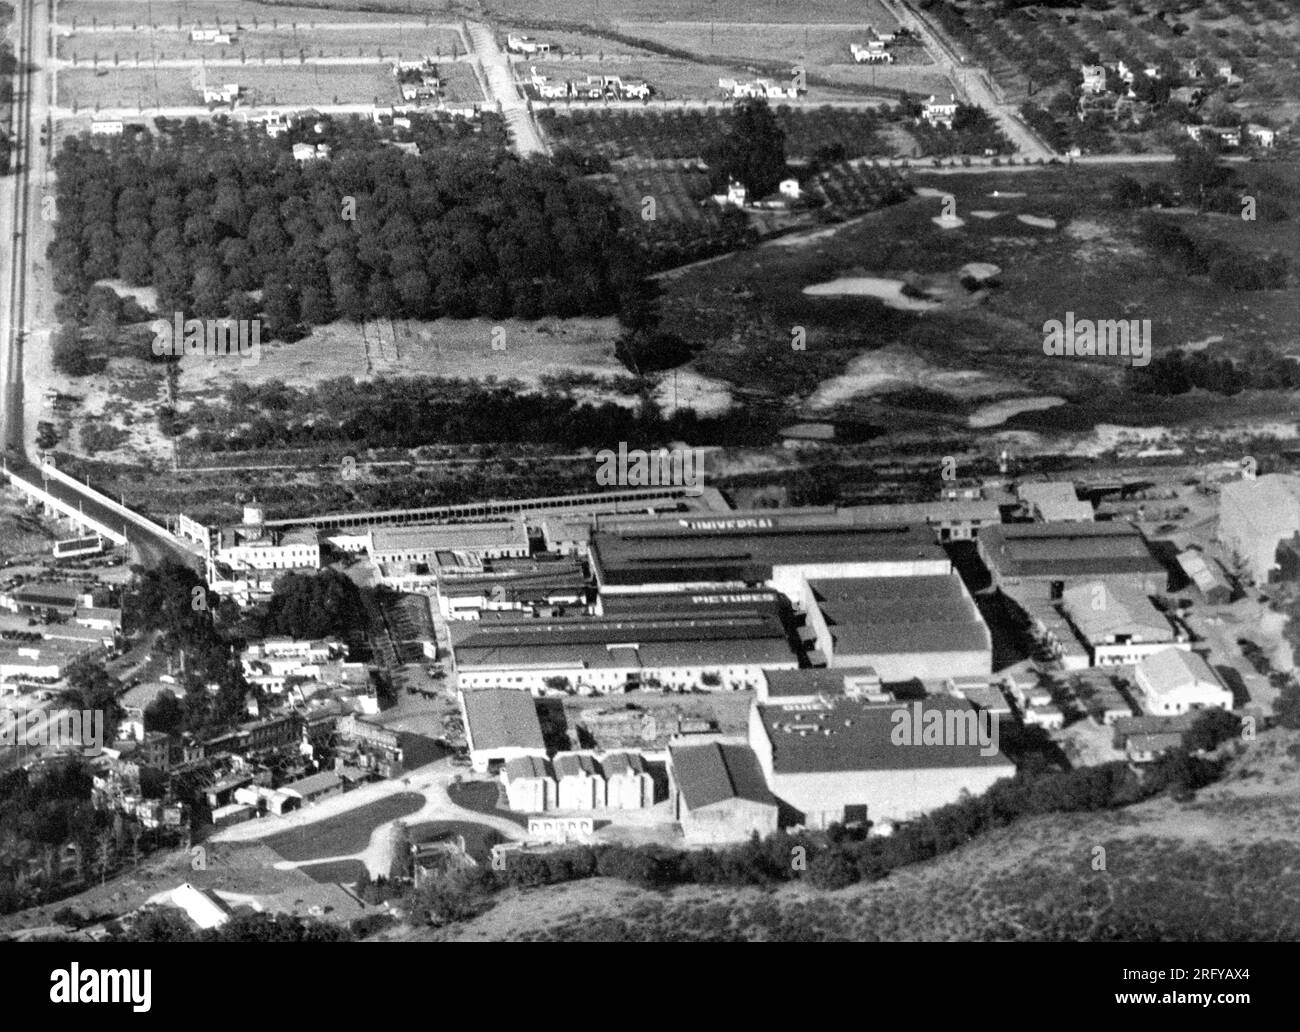 Arial View of UNIVERSAL PICTURES STUDIOS circa 1930 situated in the San Fernando Valley area of Los Angeles County, California publicity for Universal Pictures Stock Photo